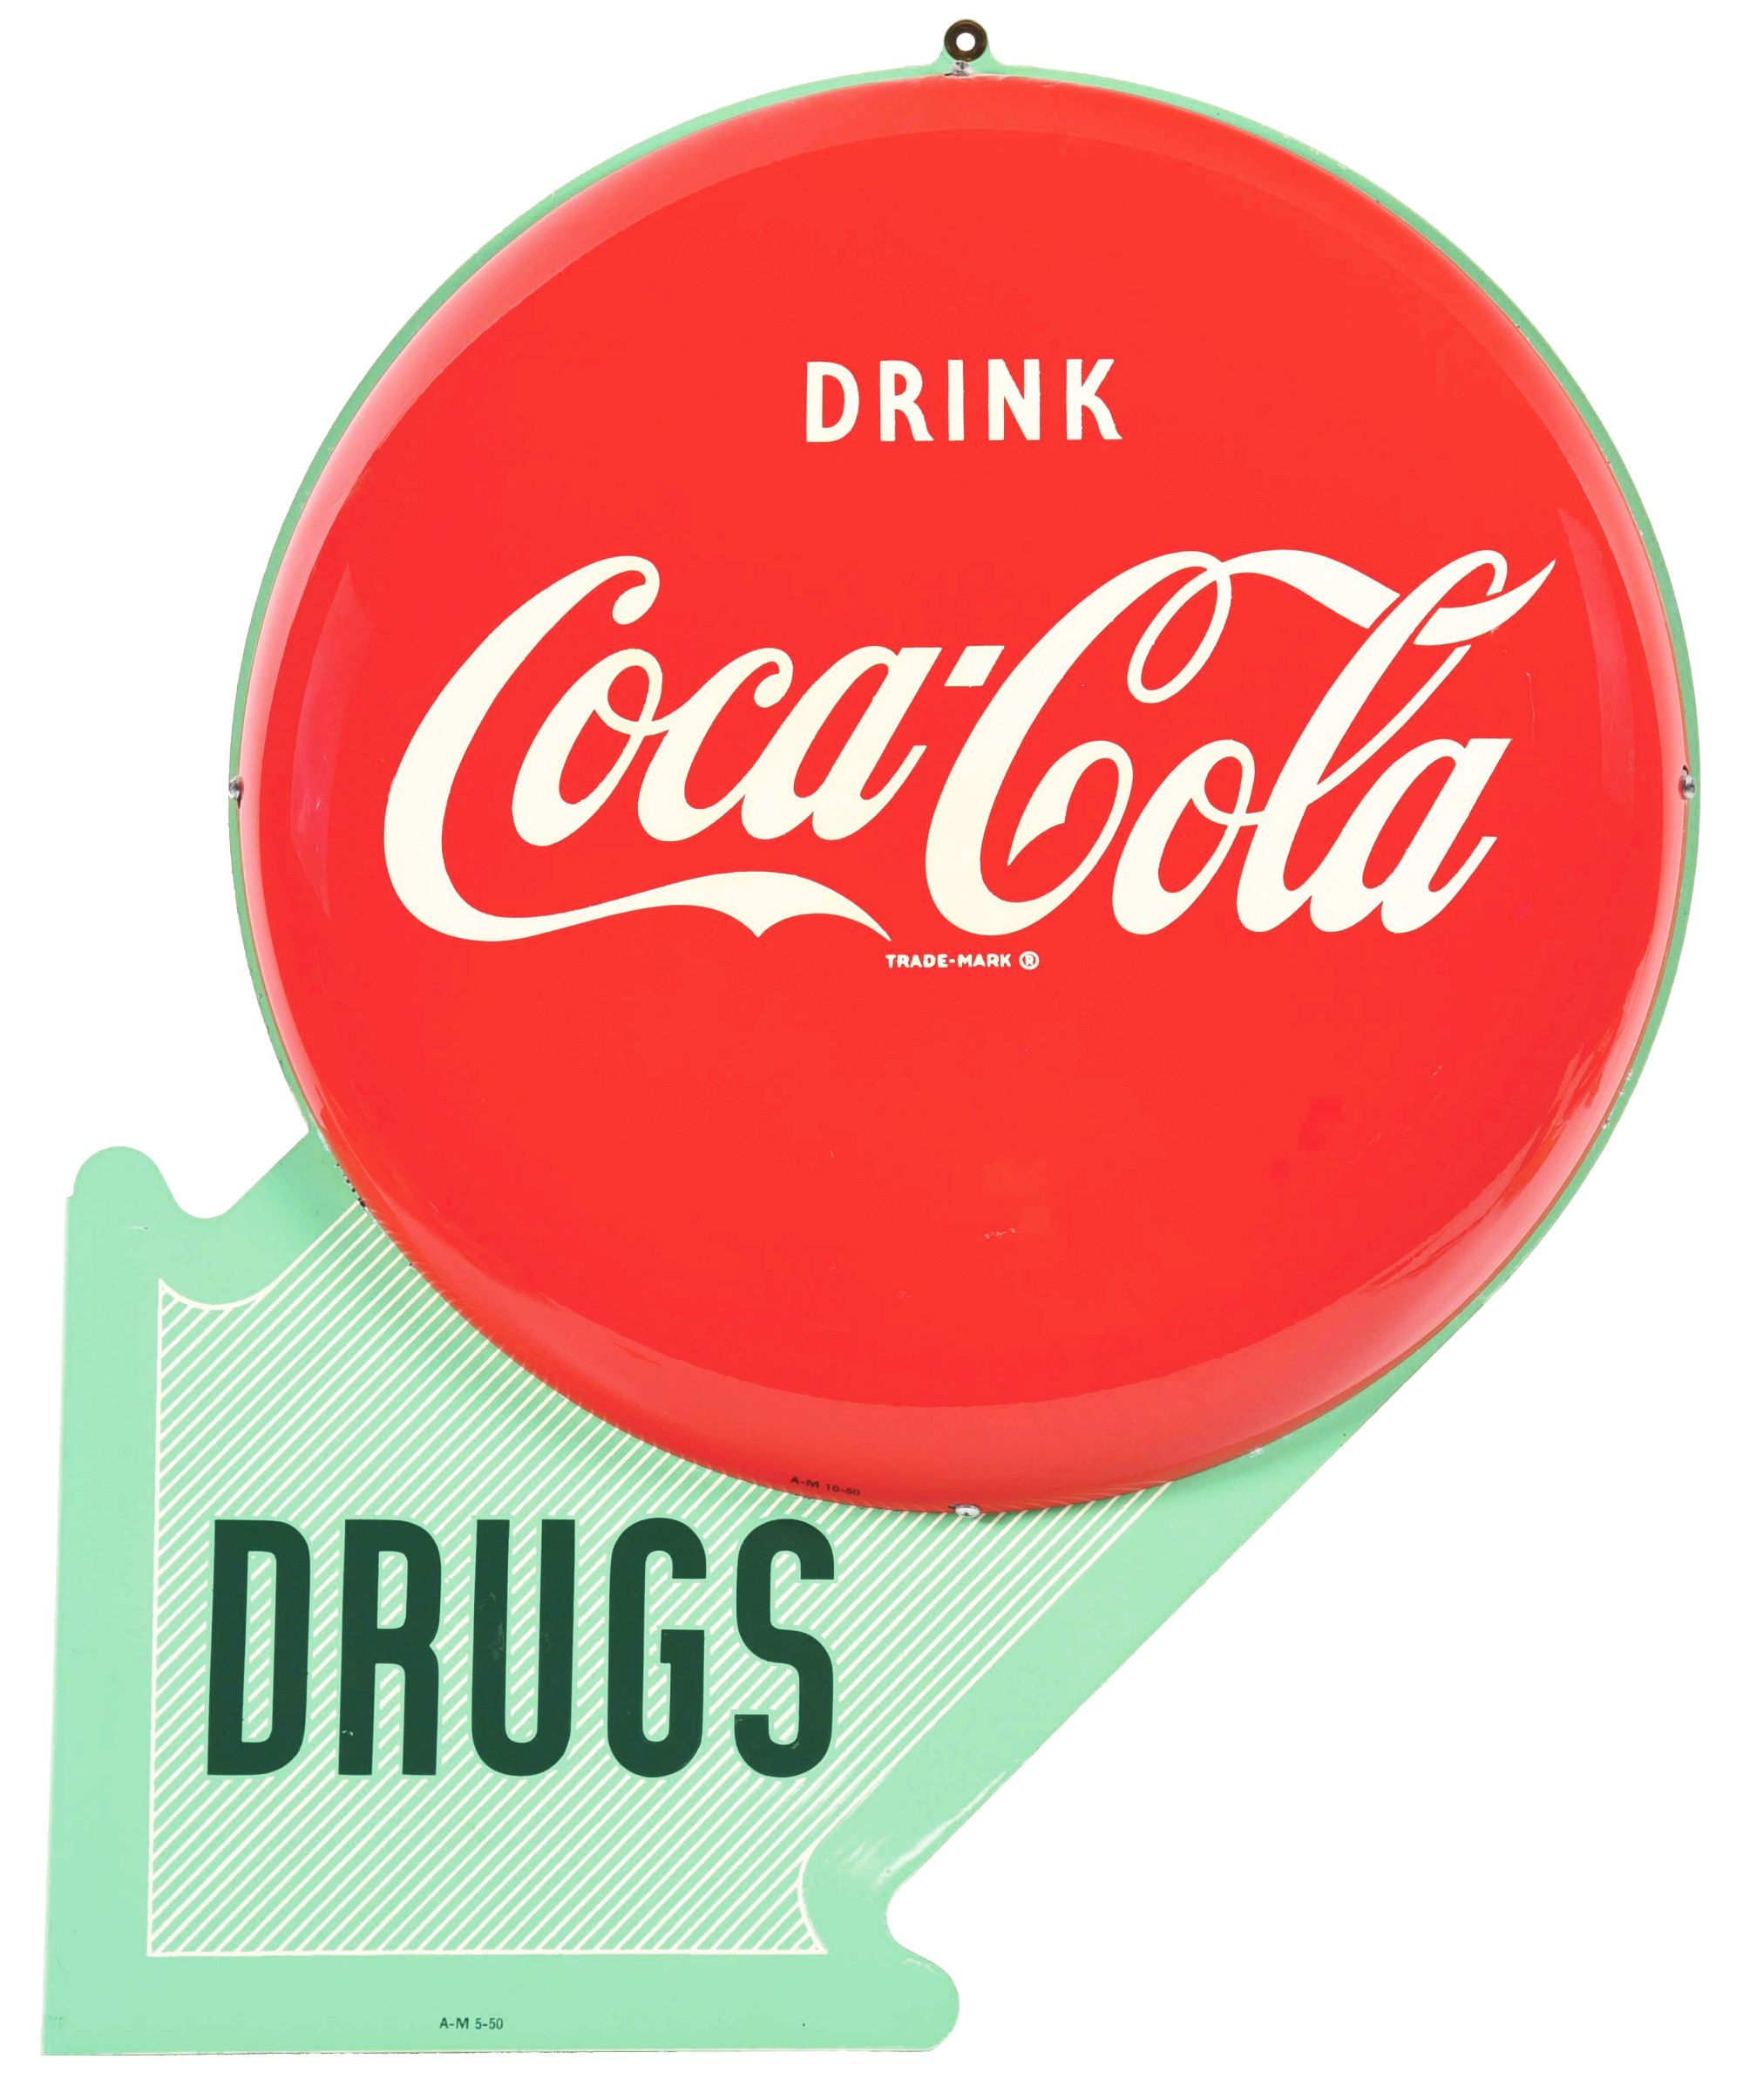 Coca-Cola ‘Drugs’ button flange sign. Size 23¼ x 17¾in. Condition 9.5; nicest example ever seen by Morphy’s experts. Estimate $4,000-$8,000